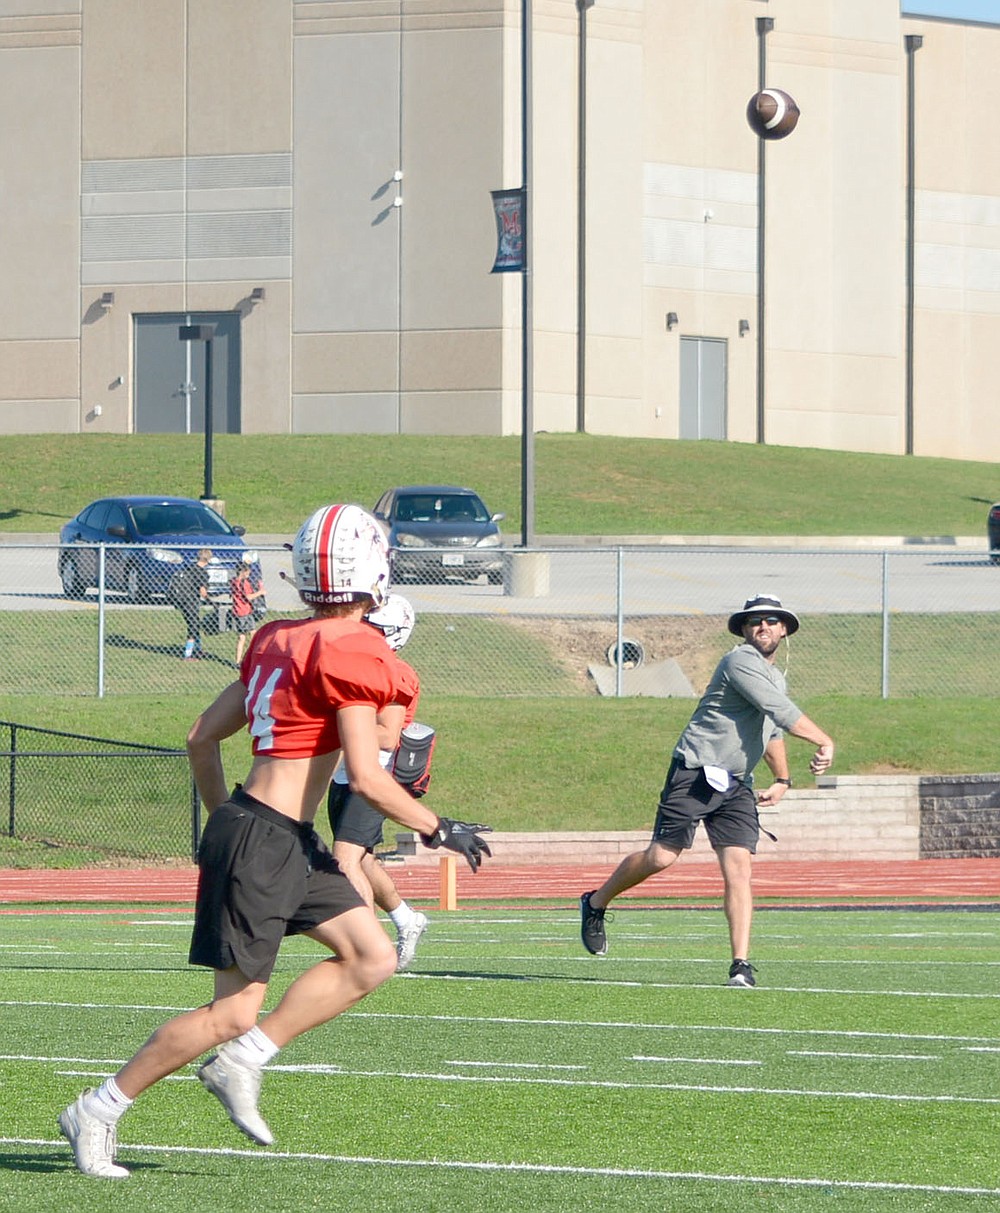 Al Gaspeny/Special to McDonald County Press
Receiver Jack Parnell prepares to make a catch during practice Monday at Mustang Stadium. McDonald County&#x201a;&#xc4;&#xf4;s passing game continues to reach new heights.